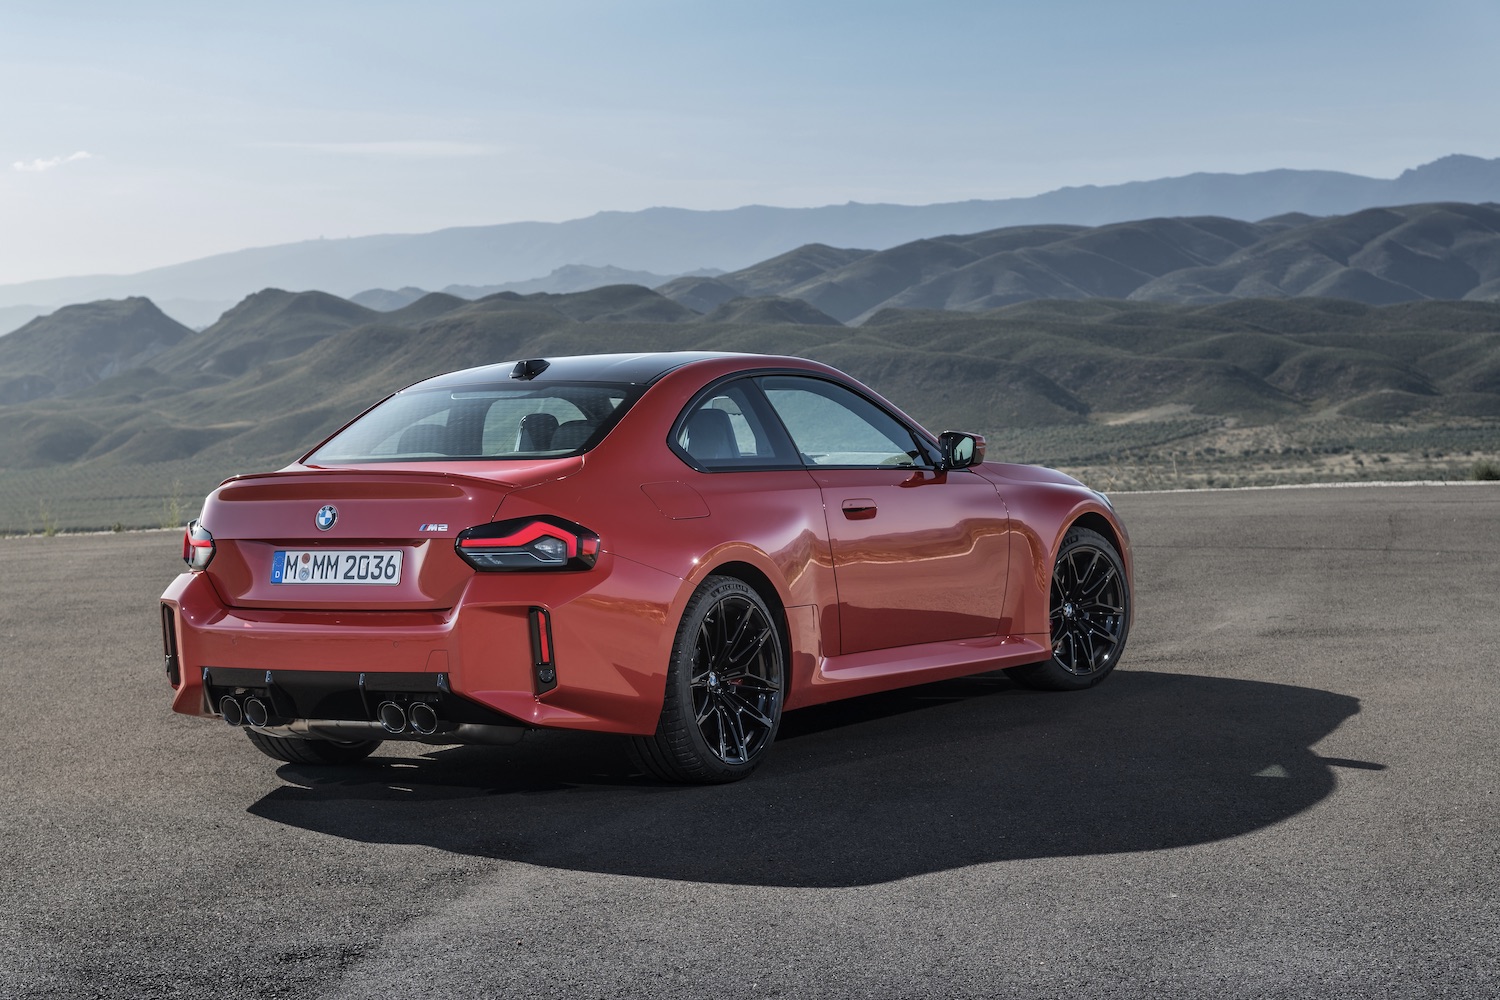 2023 BMW M2 rear end angle from the passenger's side with mountains in the back.